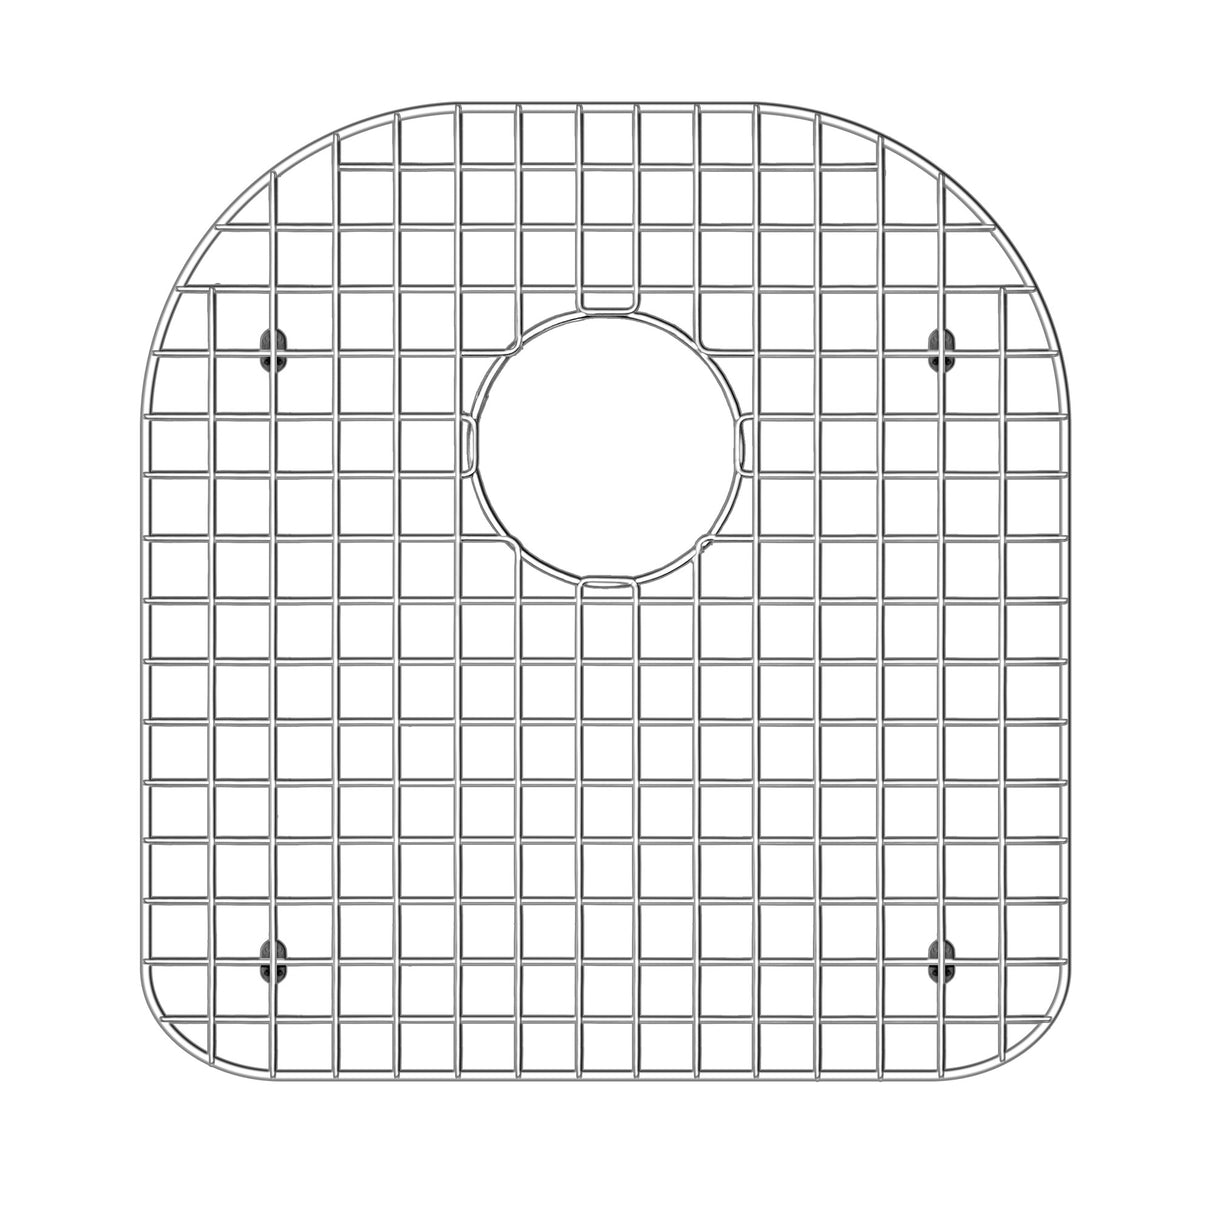 Stainless Steel Kitchen Sink Grid For Noah's Sink Model WHNC3220